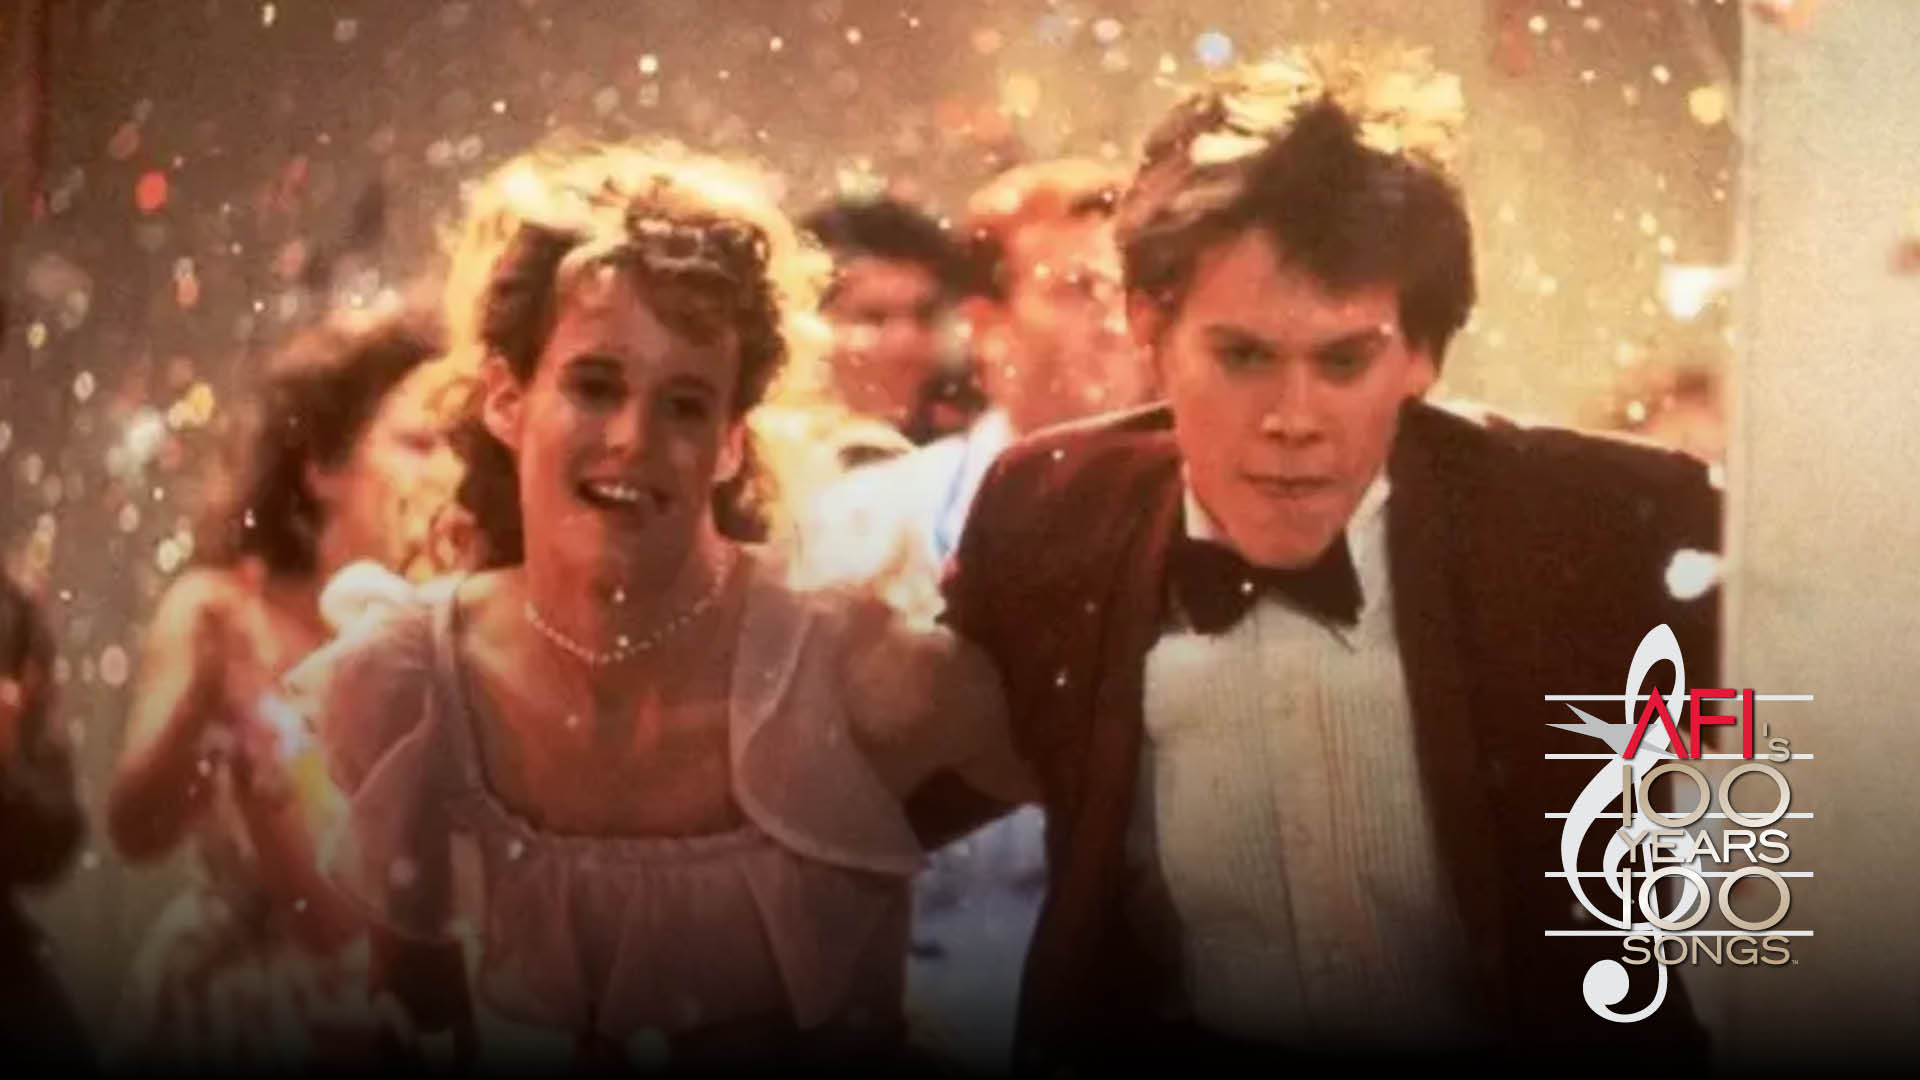 Image from FOOTLOOSE